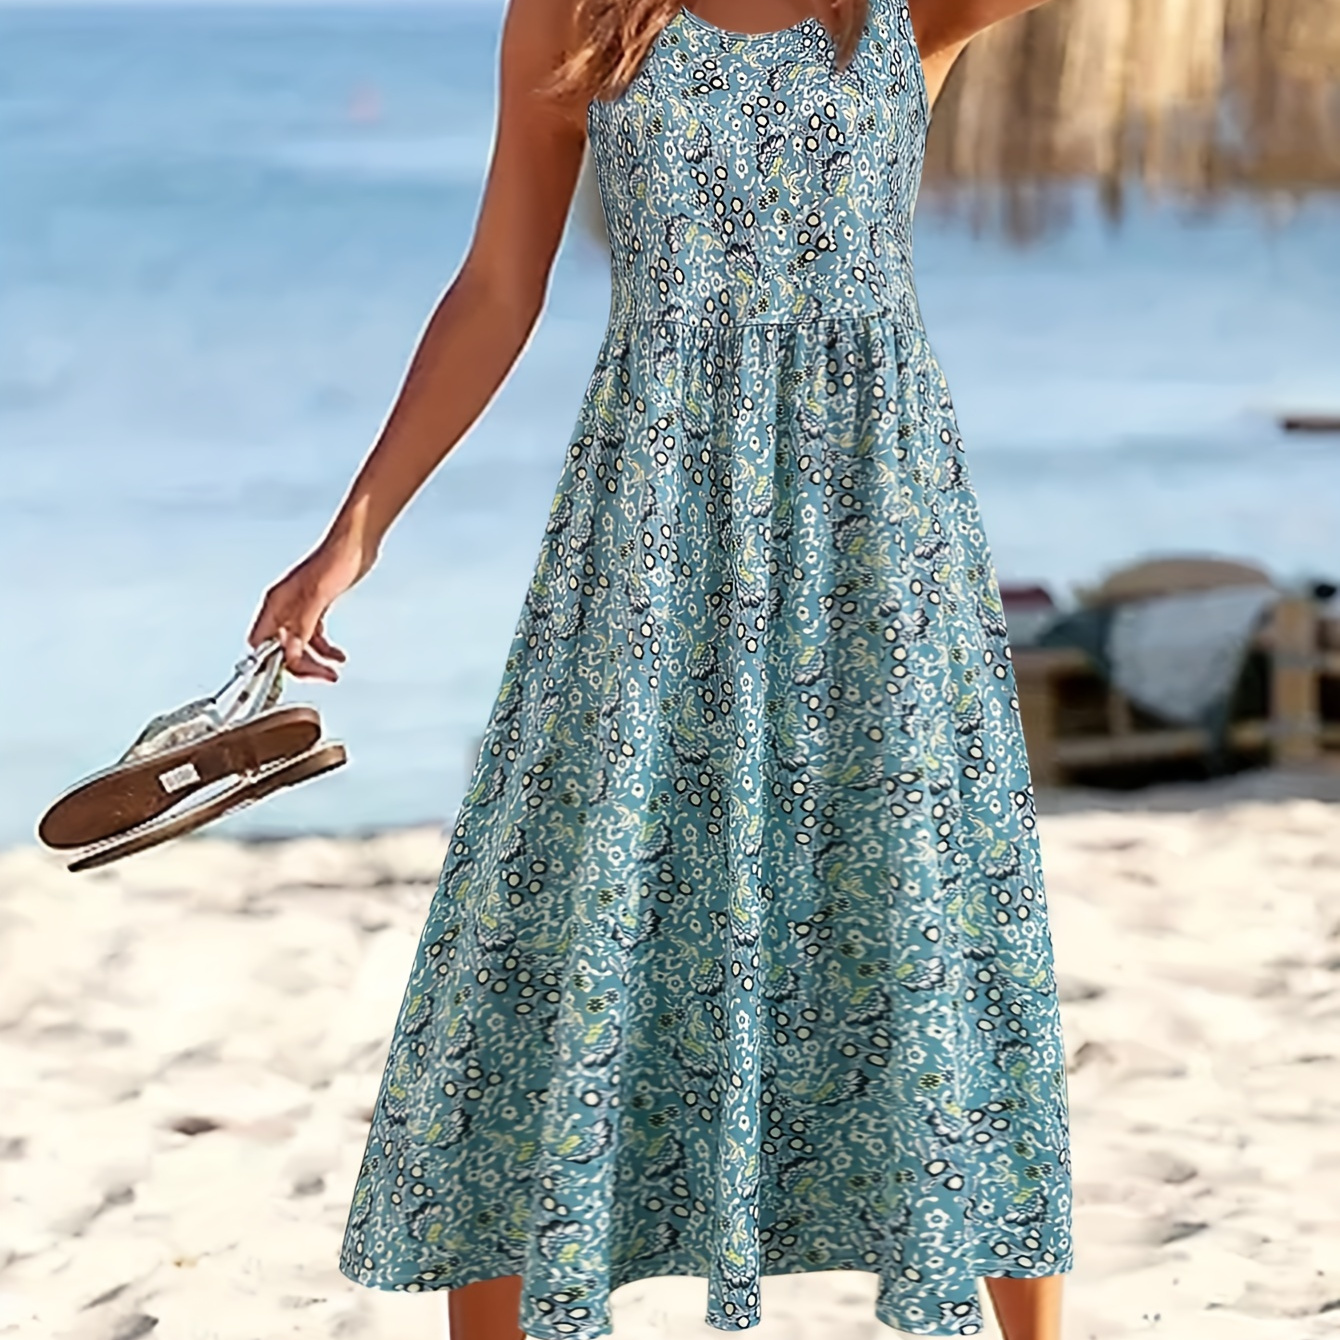 

Ditsy Floral Print Crew Neck Dress, Vacation Sleeveless Midi Dress For Spring & Summer, Women's Clothing